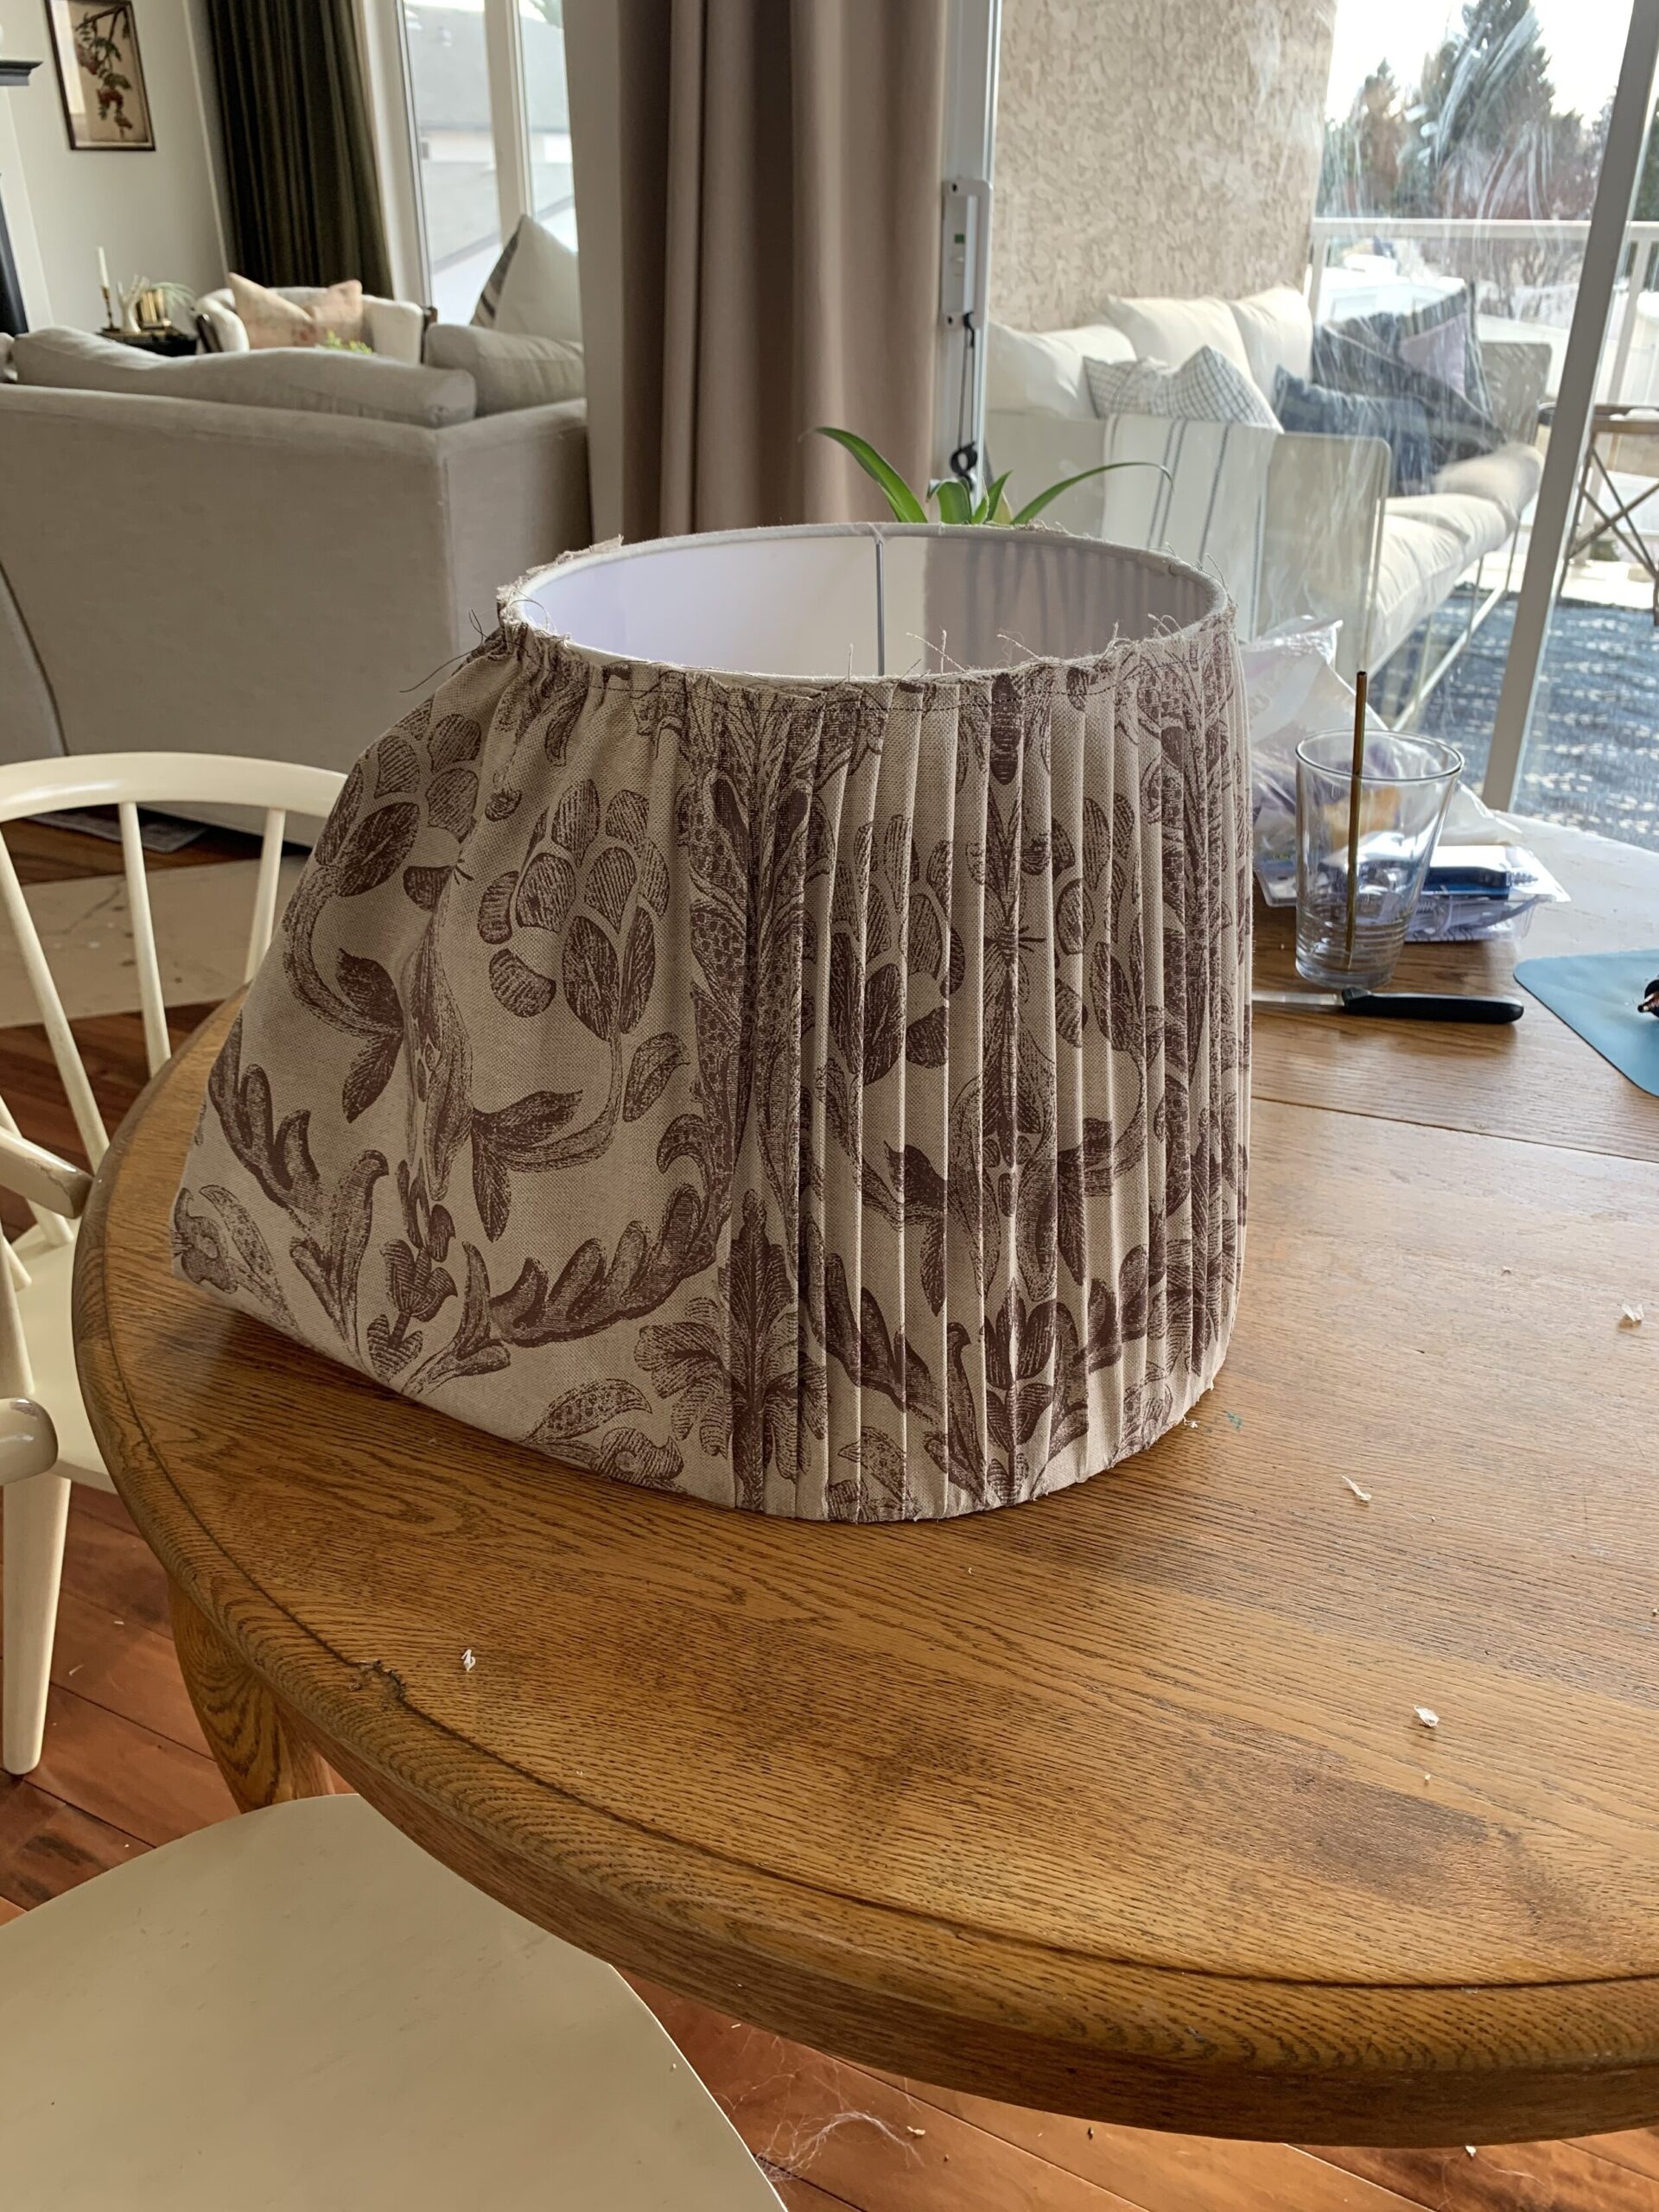 adding fabric to a lampshade with pleating, partially complete